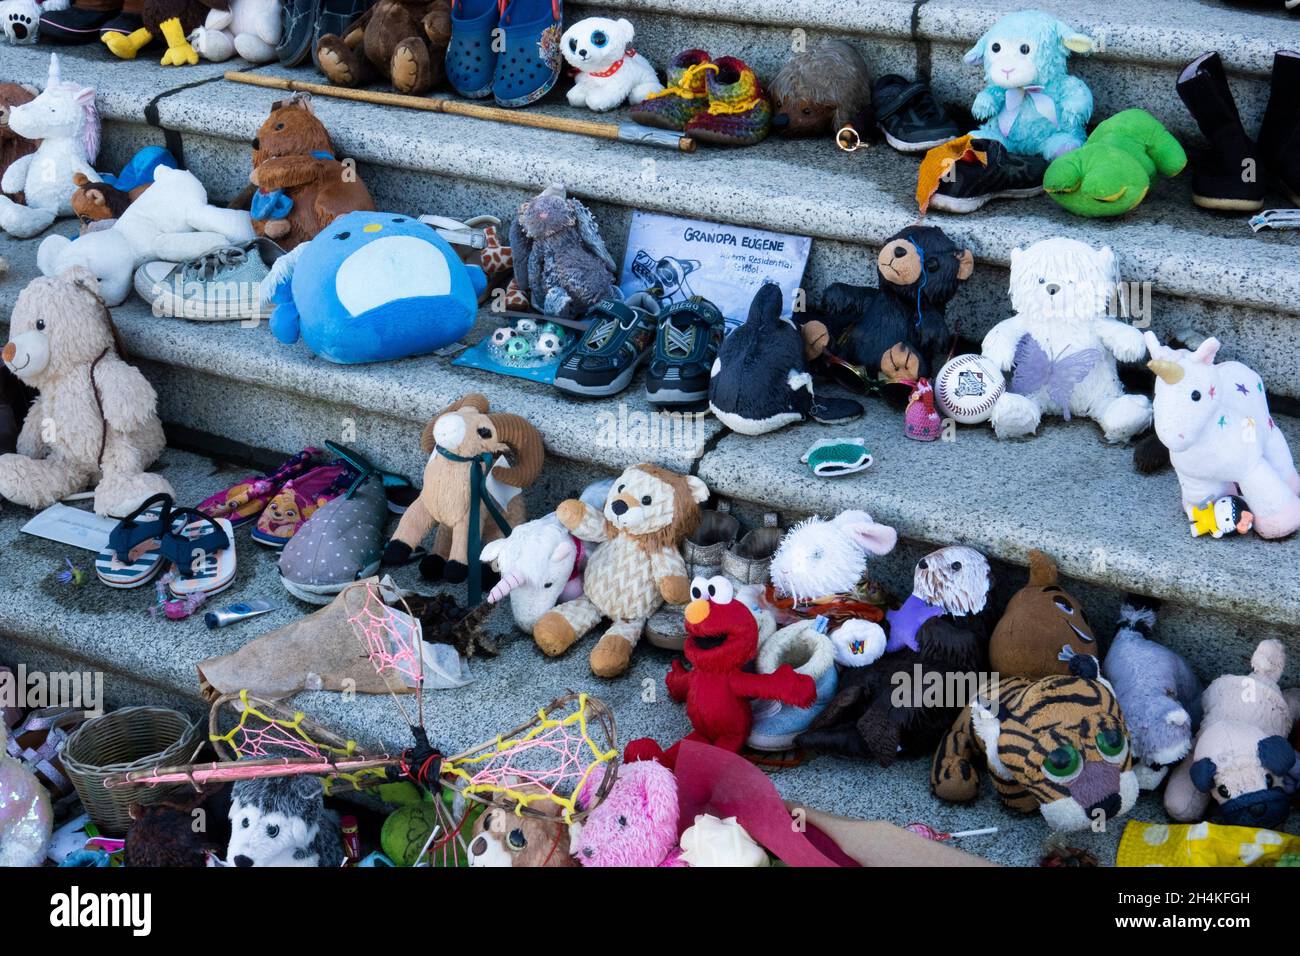 Memorial to missing indigenous children on the steps of the legislature in Victoria, BC, Canada. Stock Photo